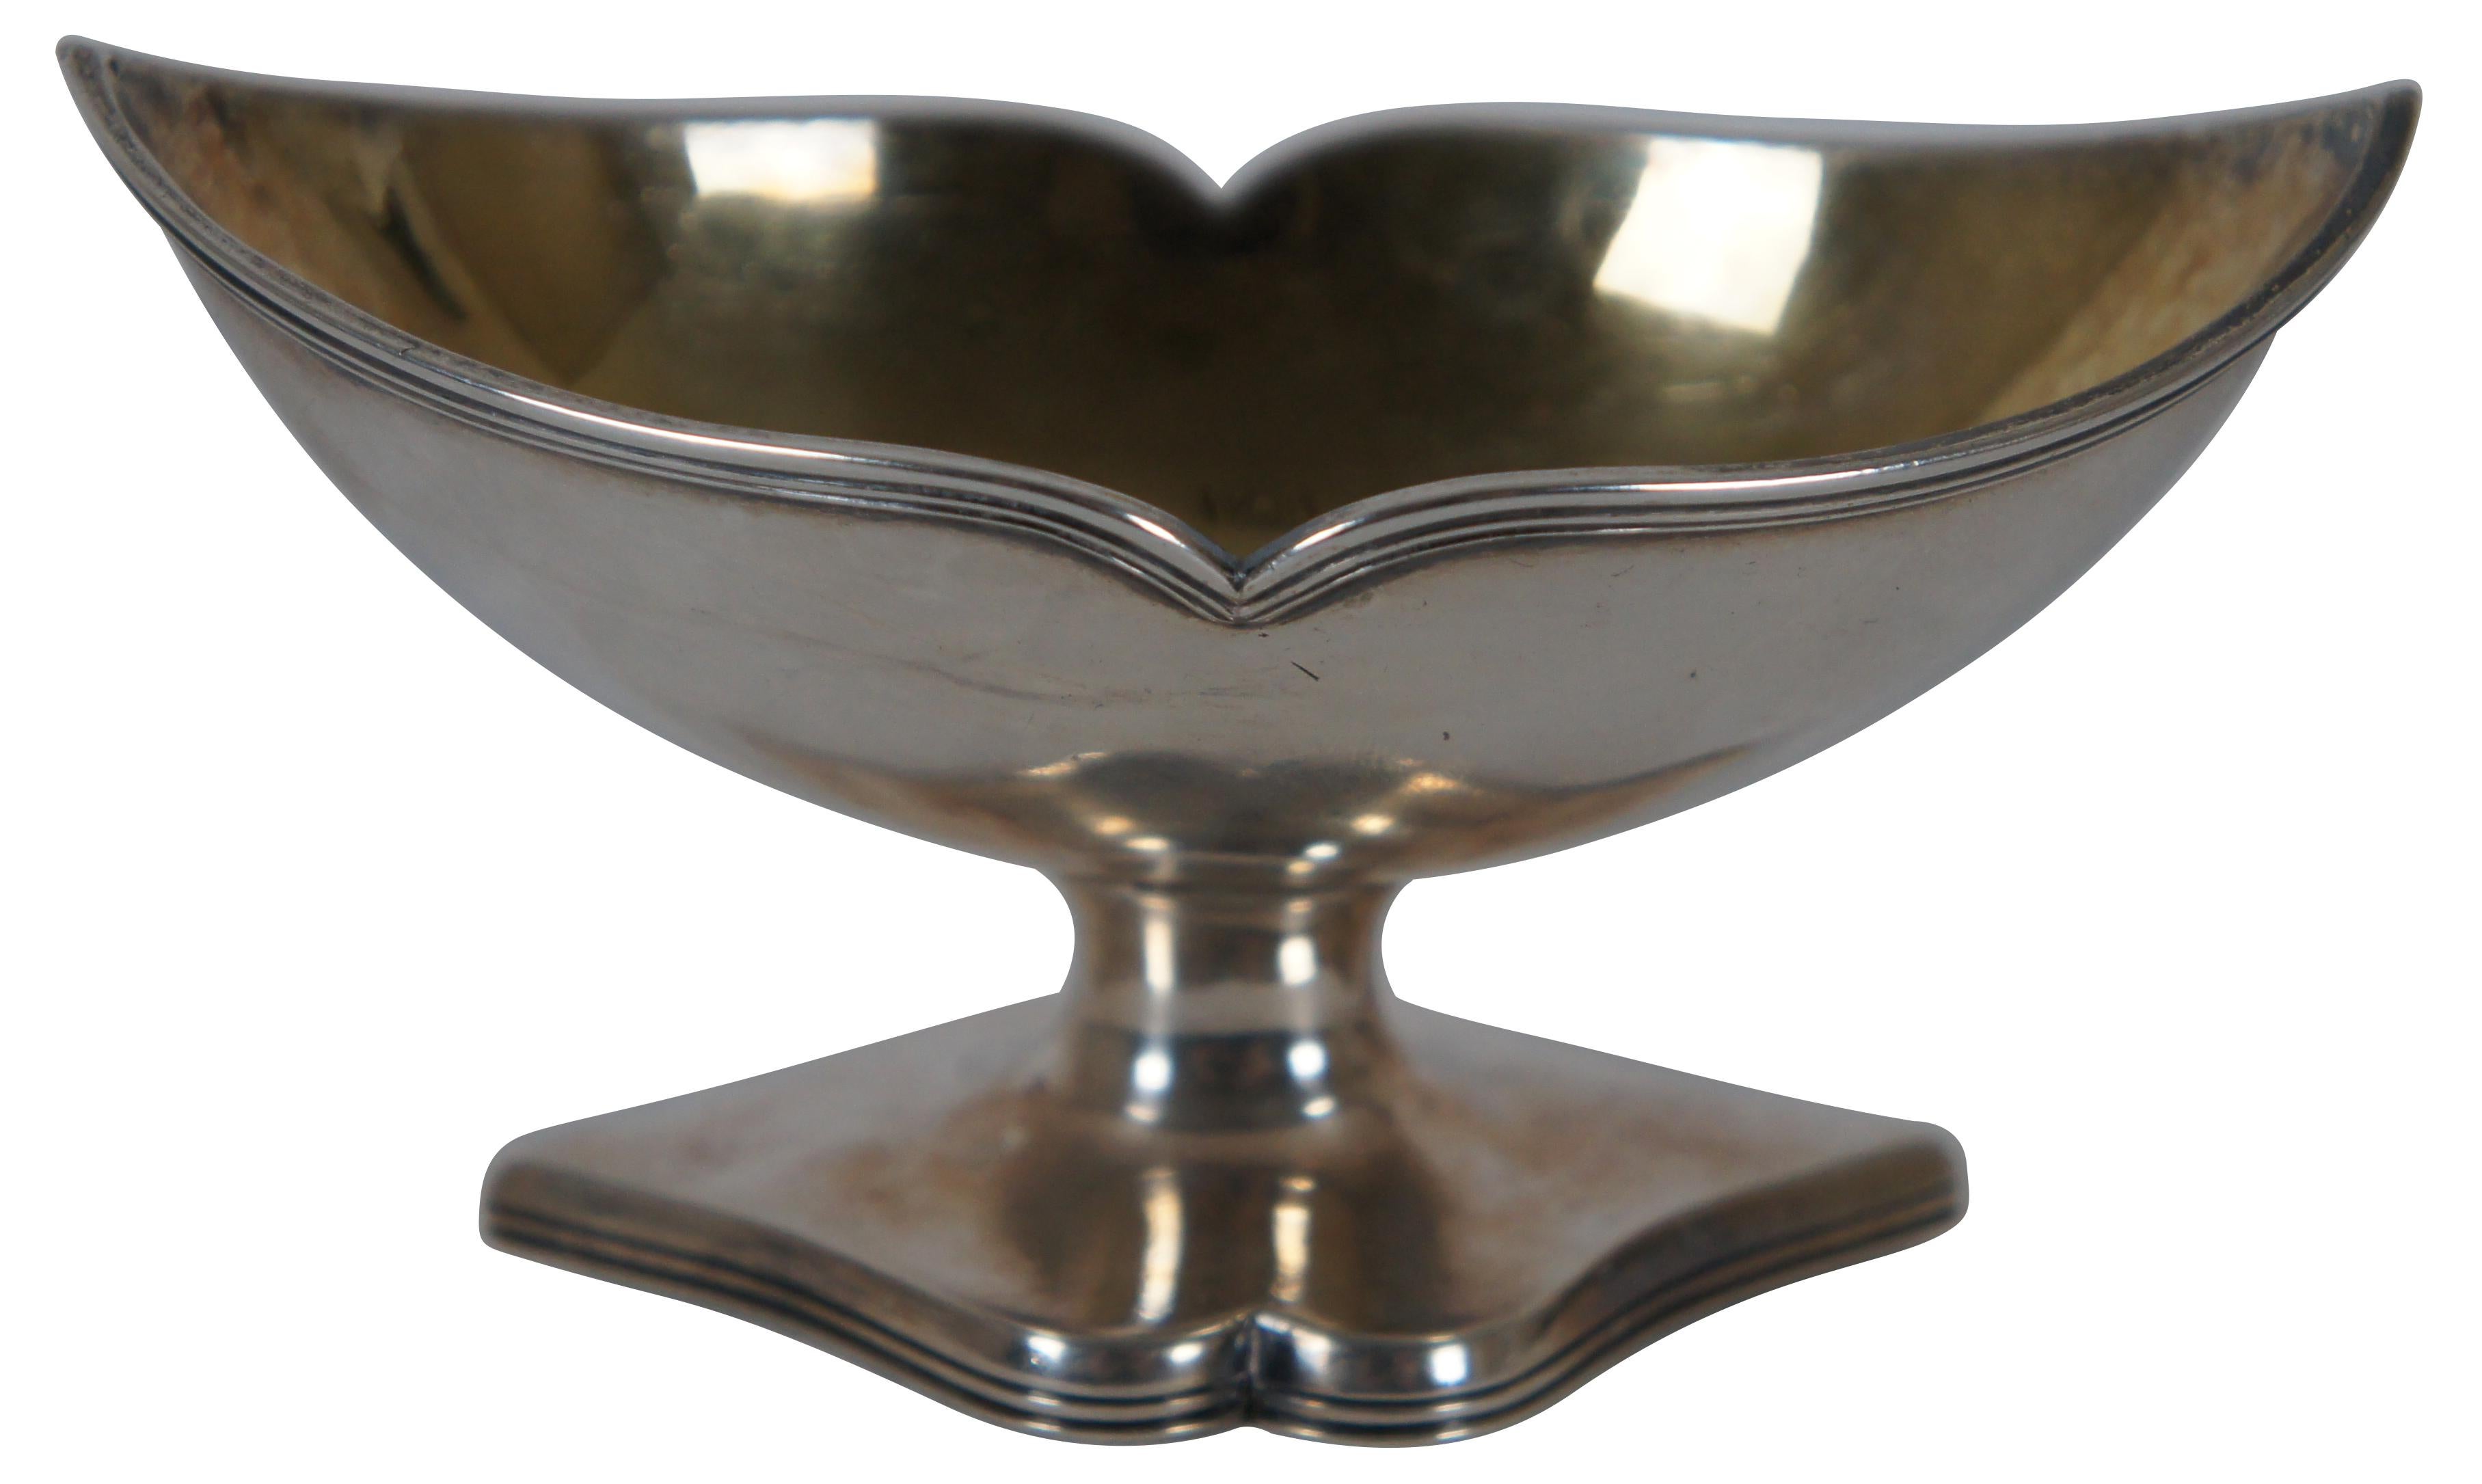 Antique early 19th century individual nut / bonbon / bone dish / salt cellar by London silversmith Moses Brent, 1835. Features a scalloped boat shape, fluted trim and gold washed interior. Monogrammed with the initials M.C.R. Weight 89.9g